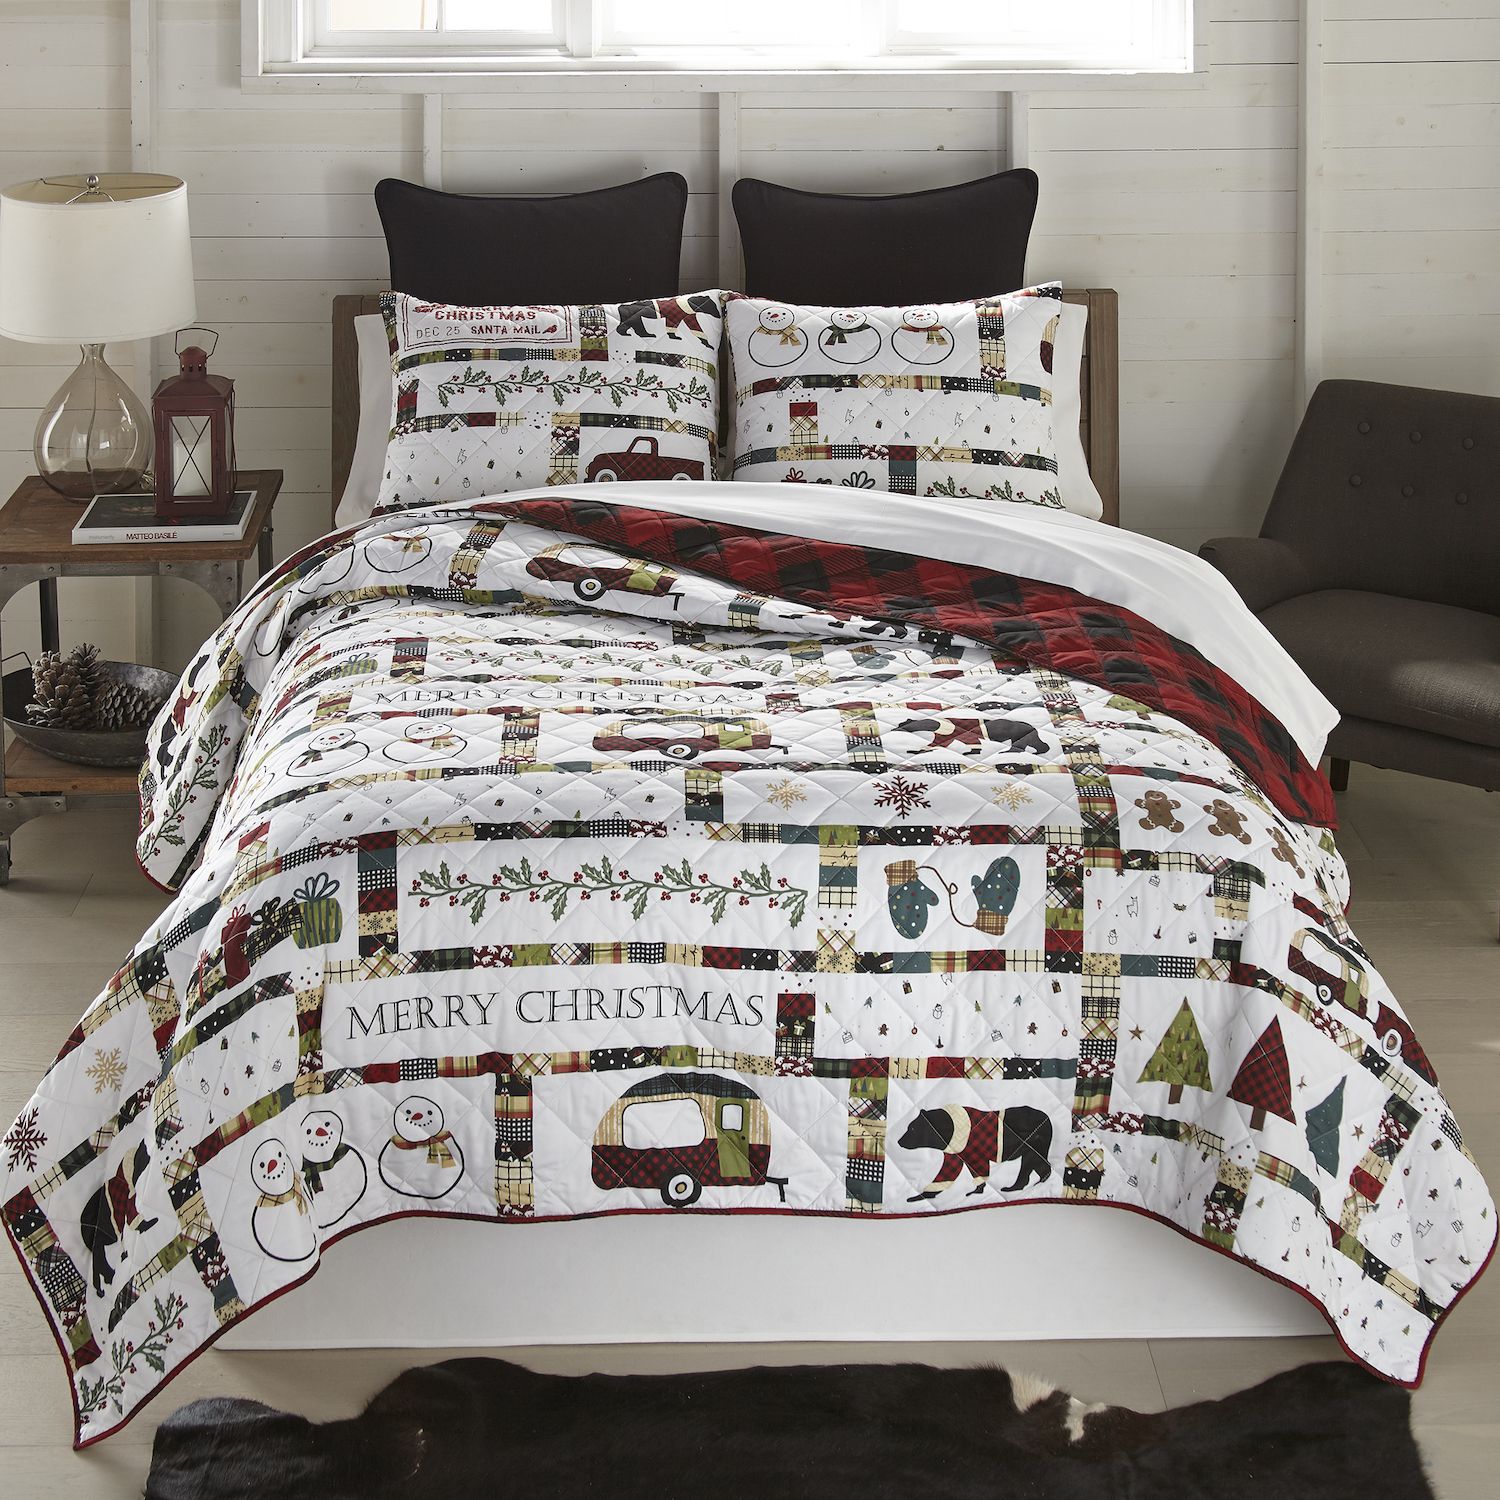 Image for Donna Sharp Merry Vacation Quilt Set with Shams at Kohl's.